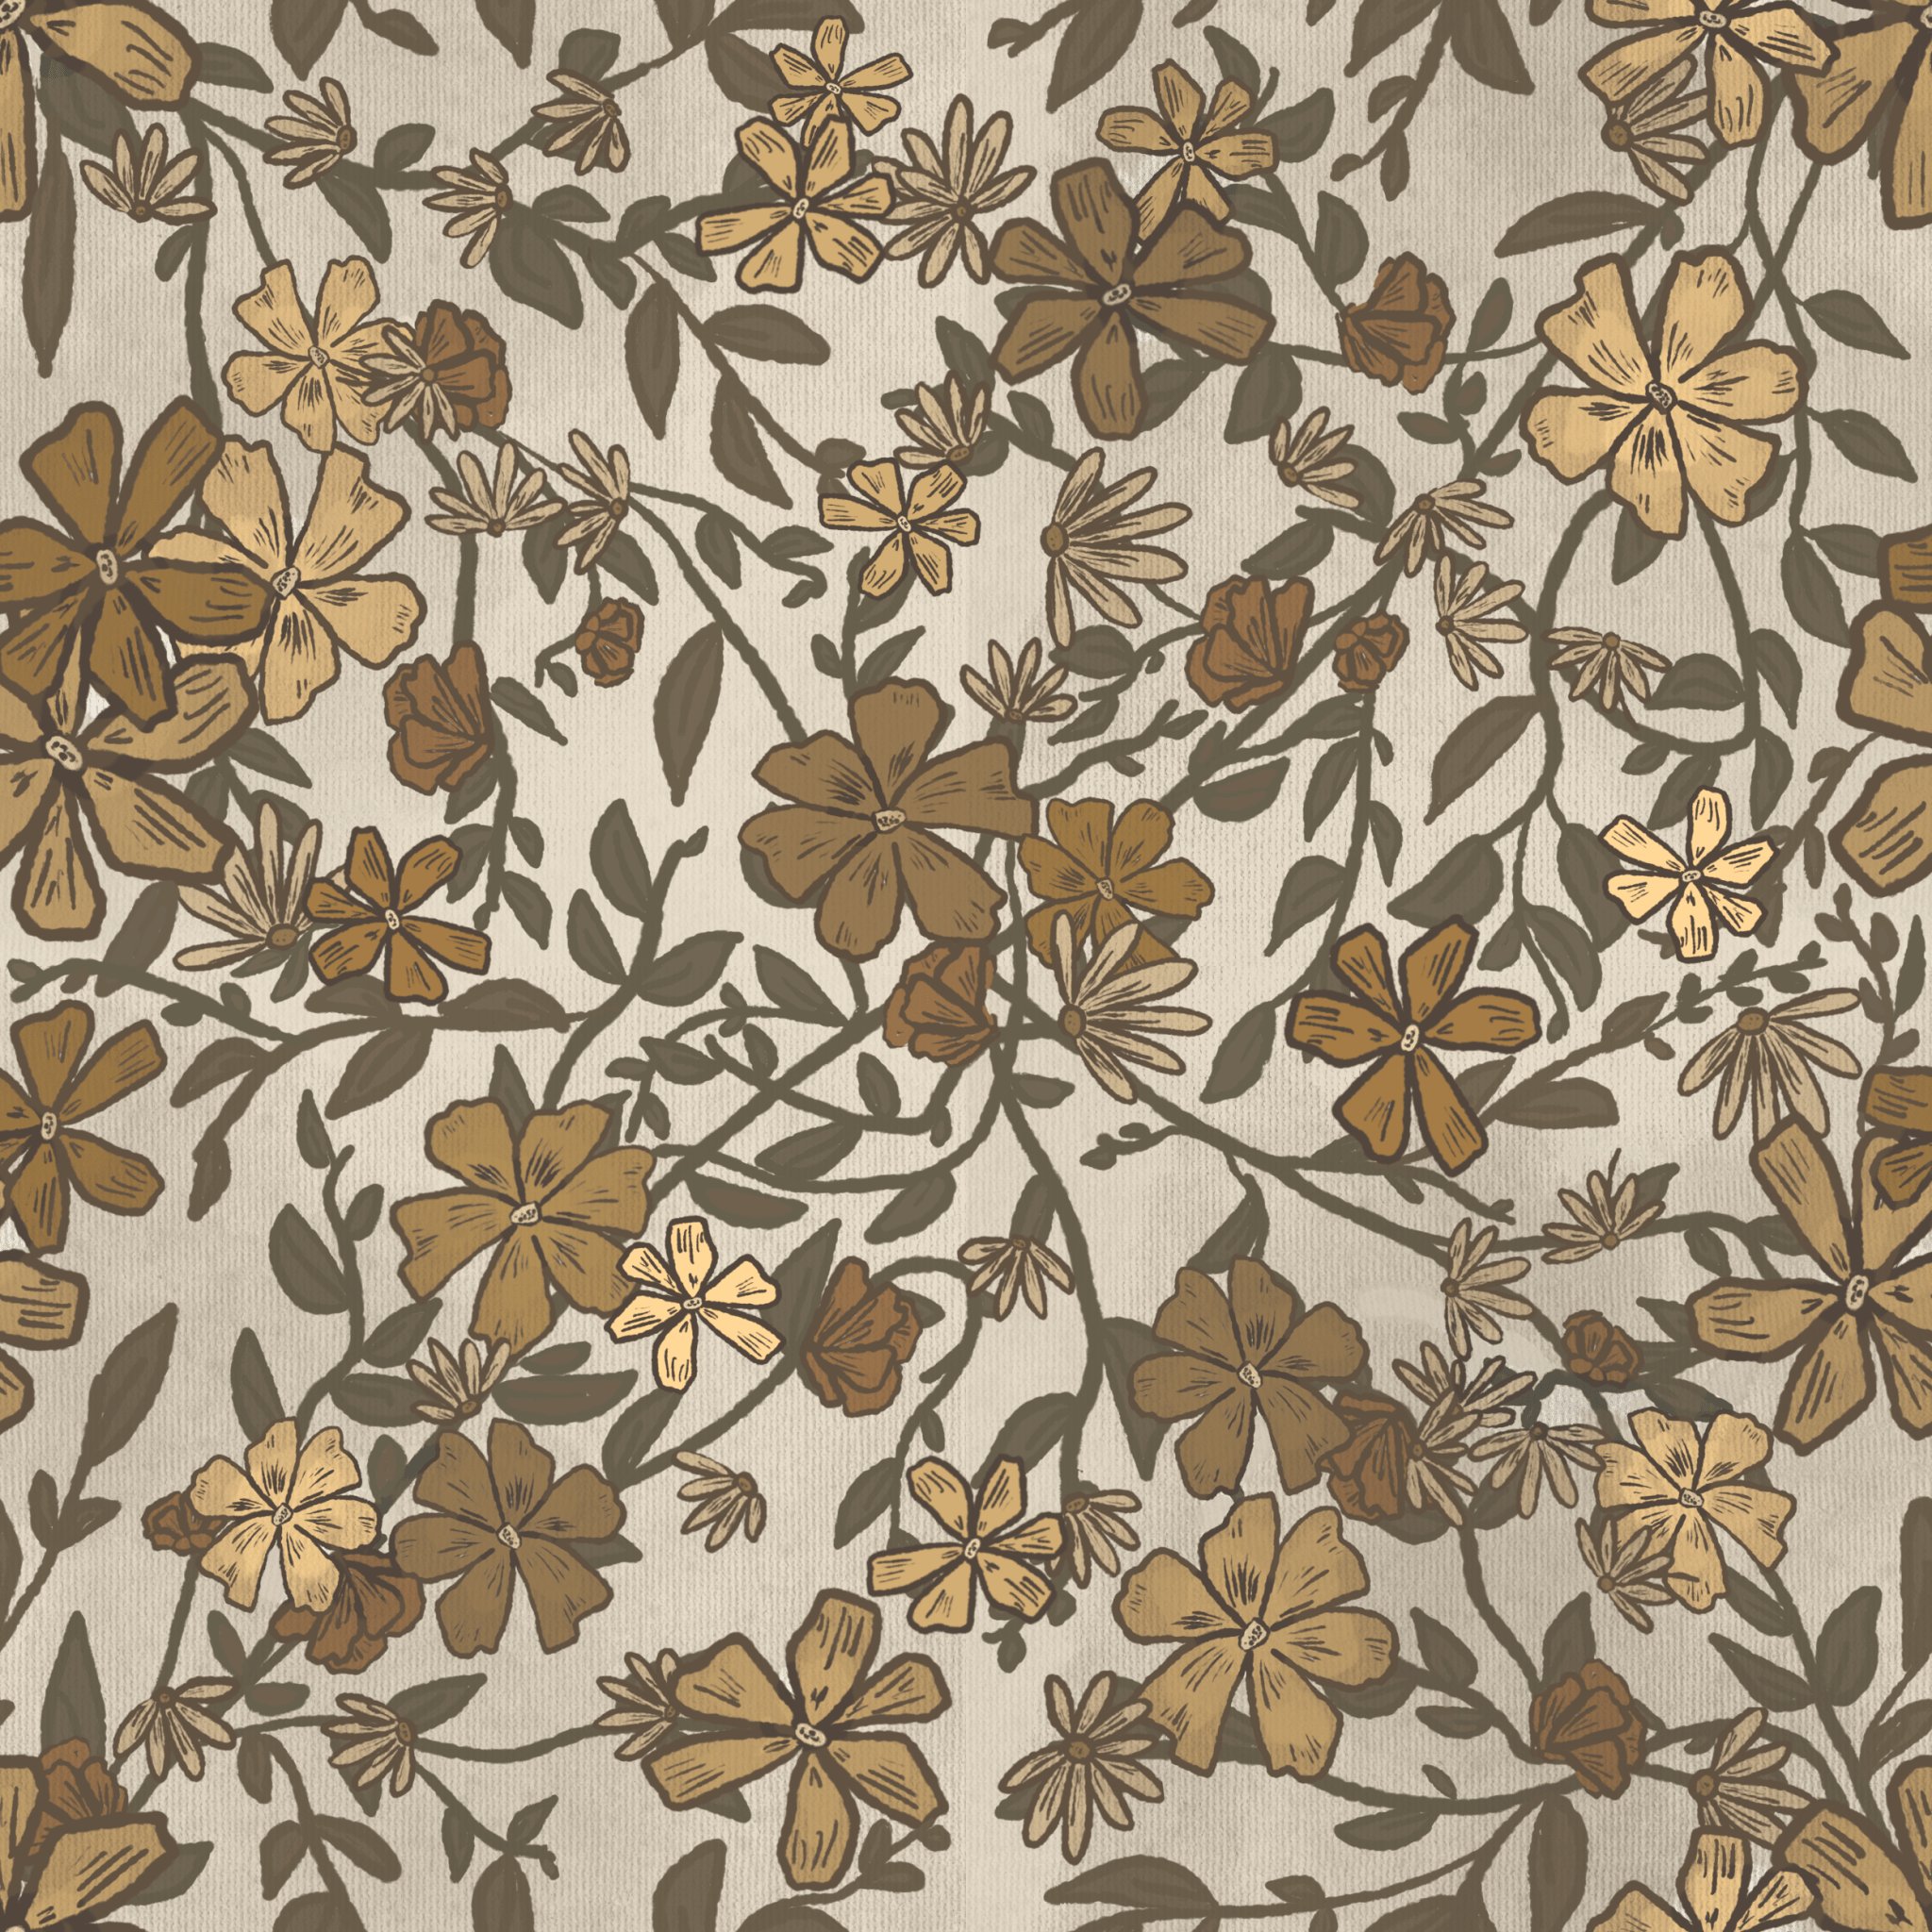 A close-up of a floral pattern wallpaper with a beige background, featuring stylized flowers in shades of brown and olive green, with a seamless, dense design that gives a vintage look.